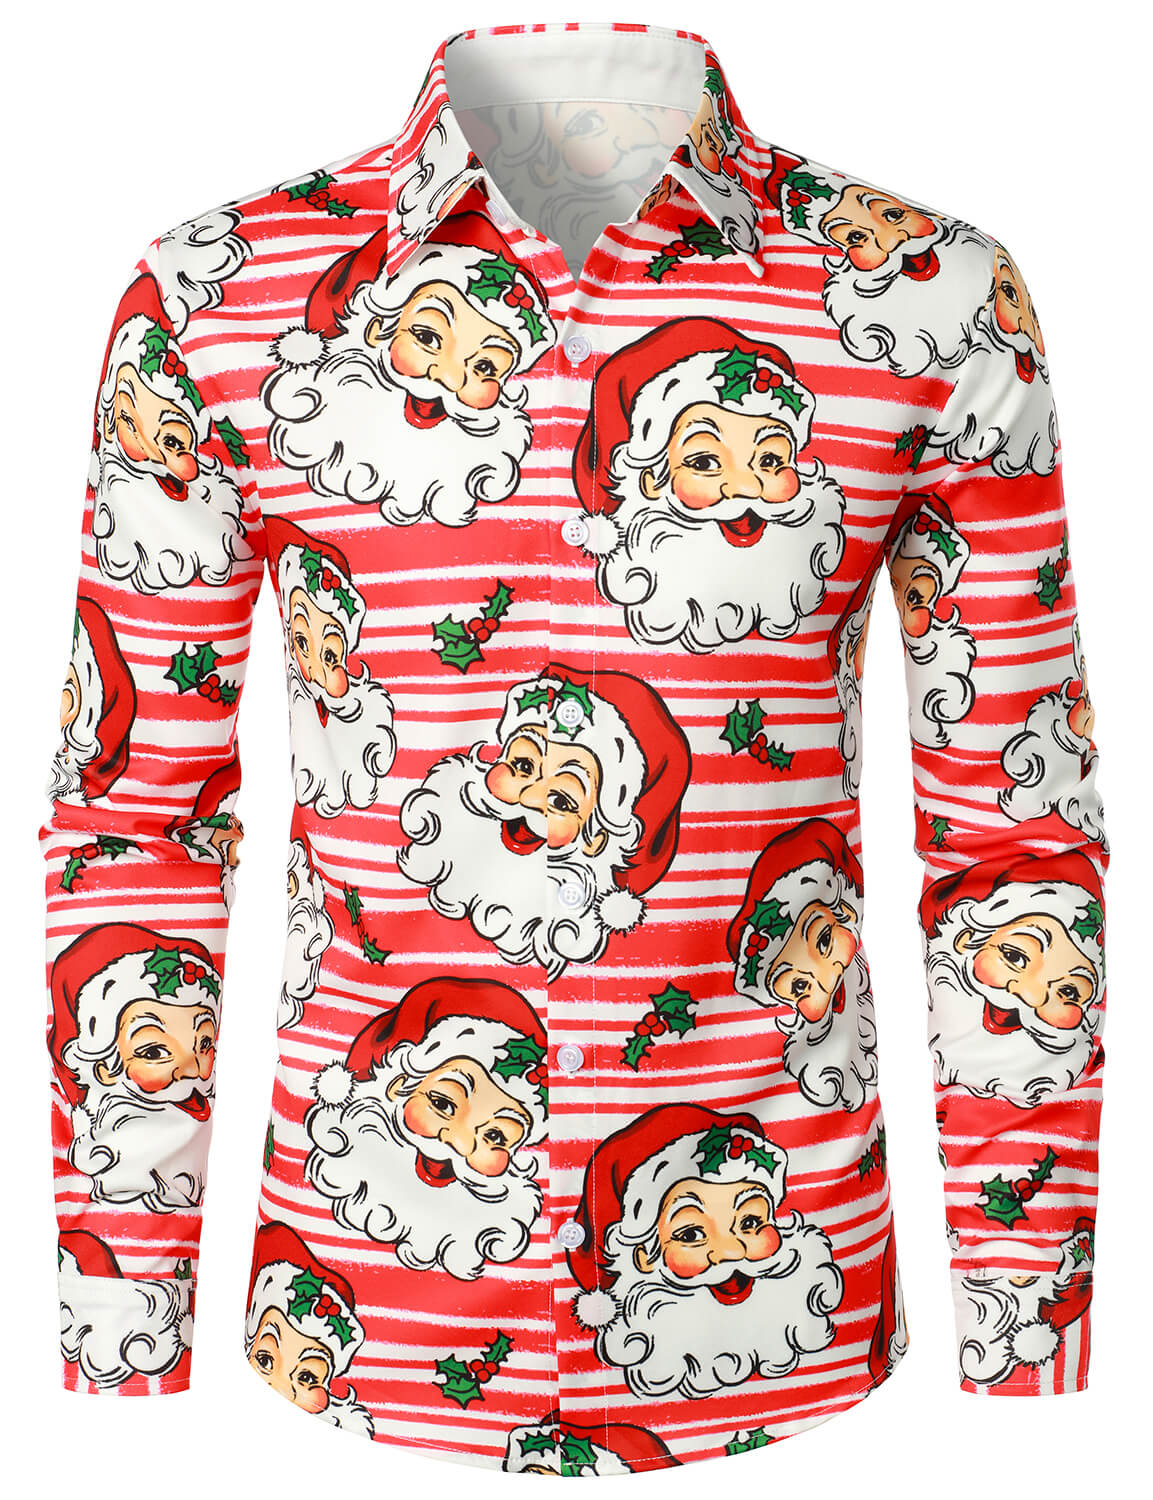 Men's Christmas Santa Claus Holiday Button Up Red Striped Long Sleeve Shirt